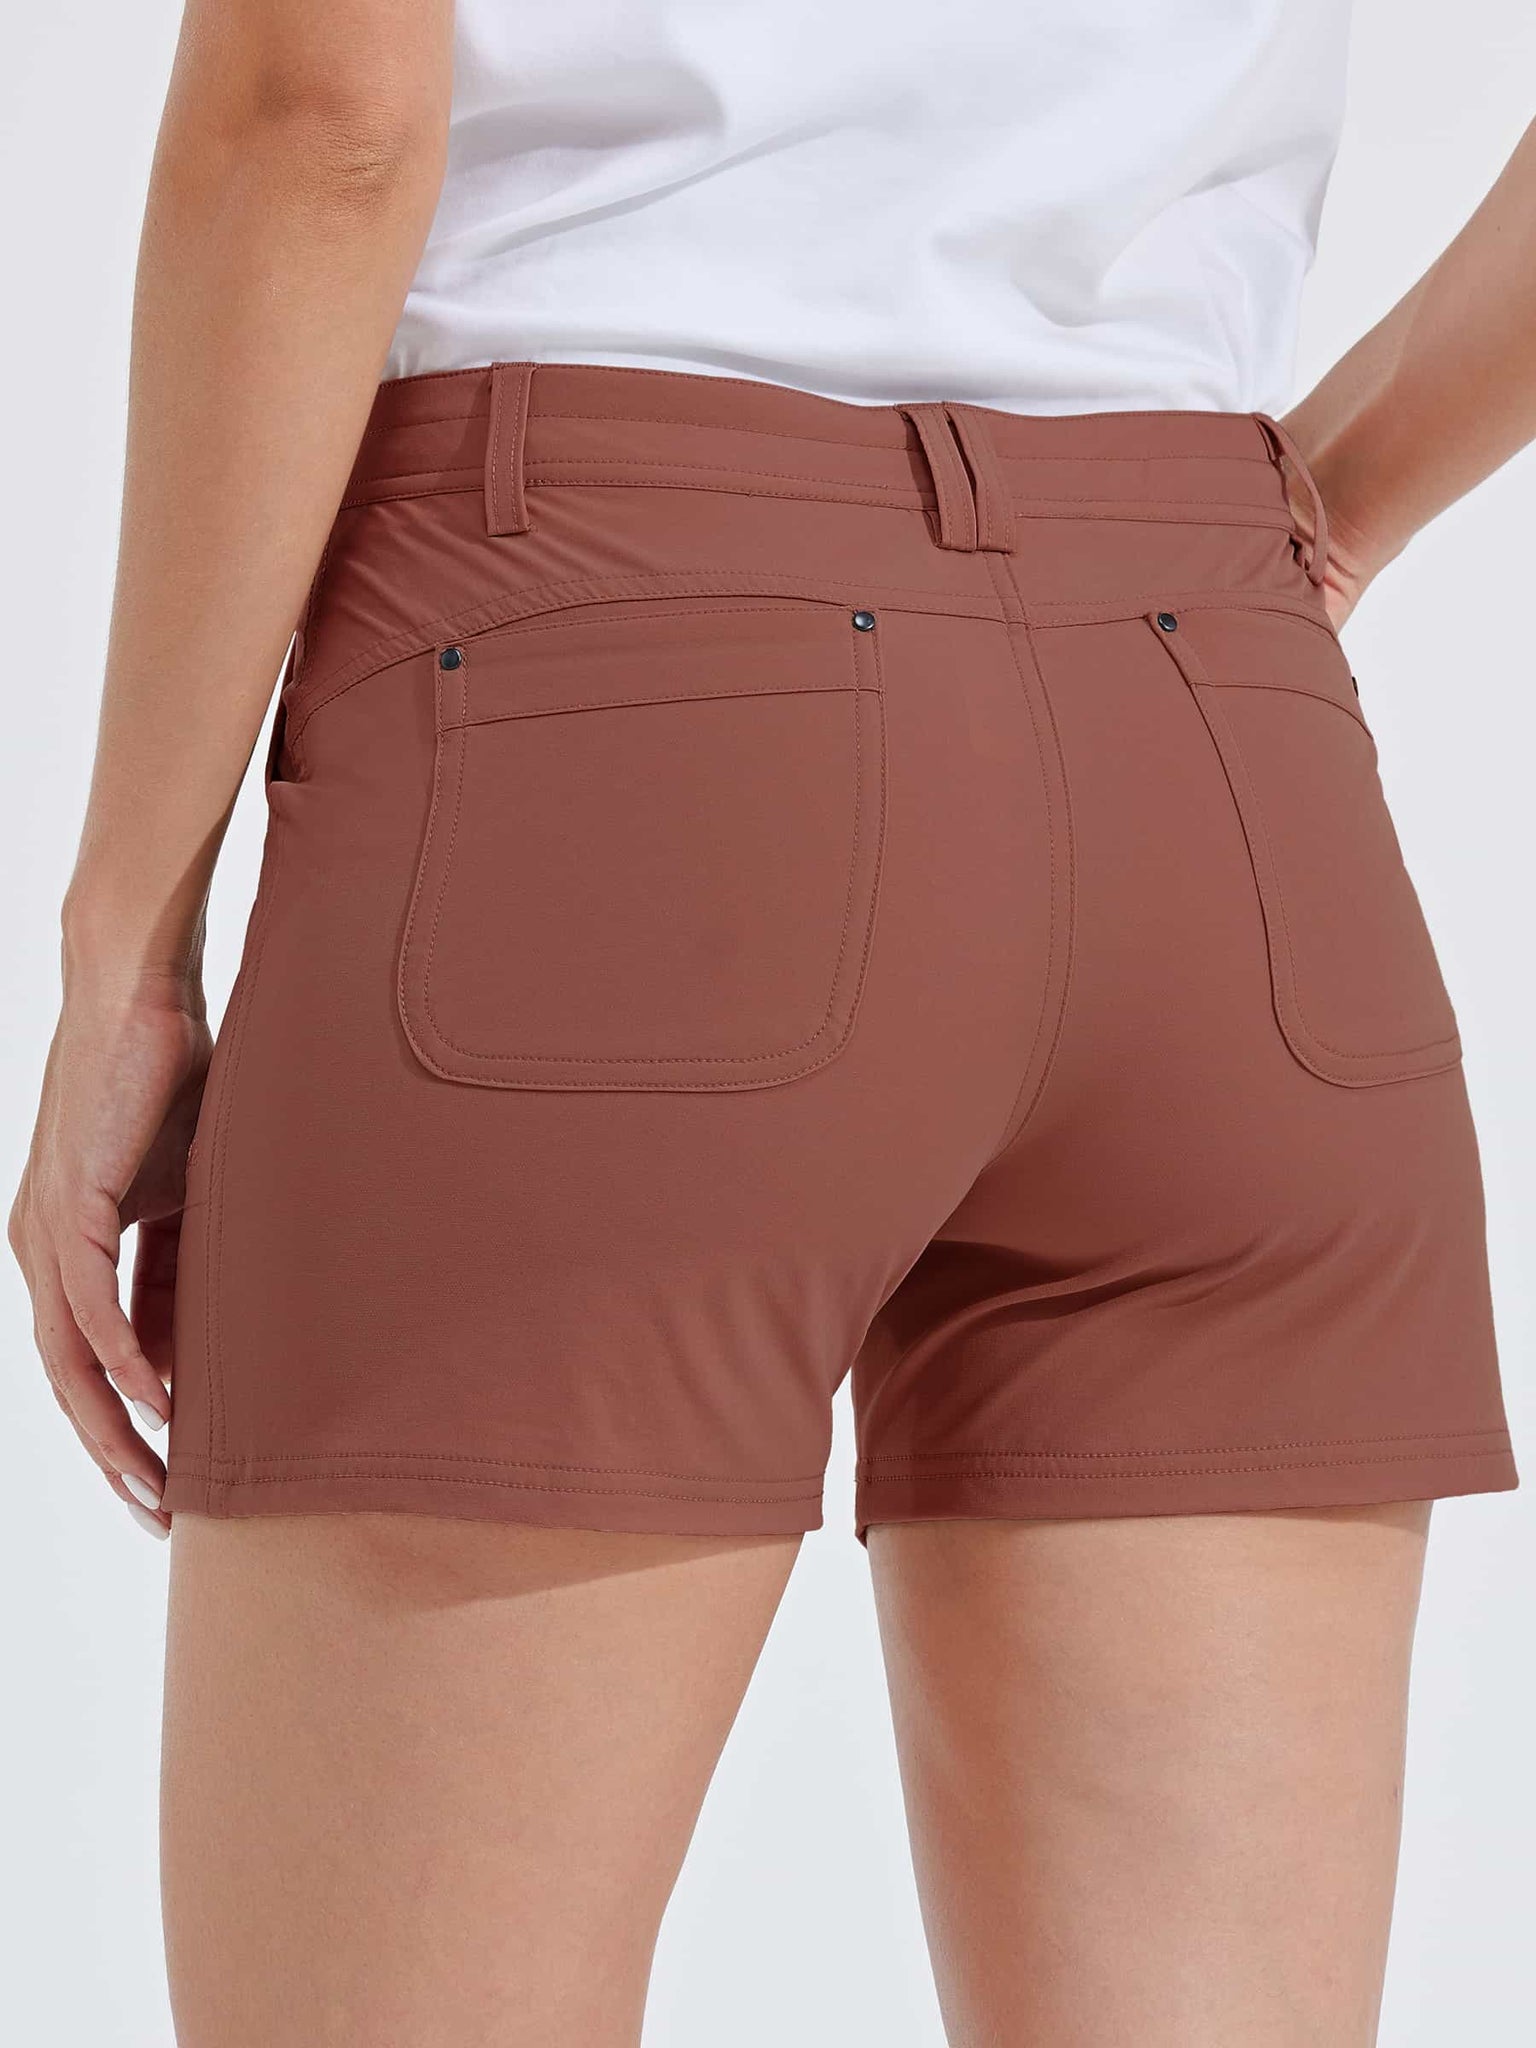 Women's Outdoor Golf Hiking Shorts_Cacao4